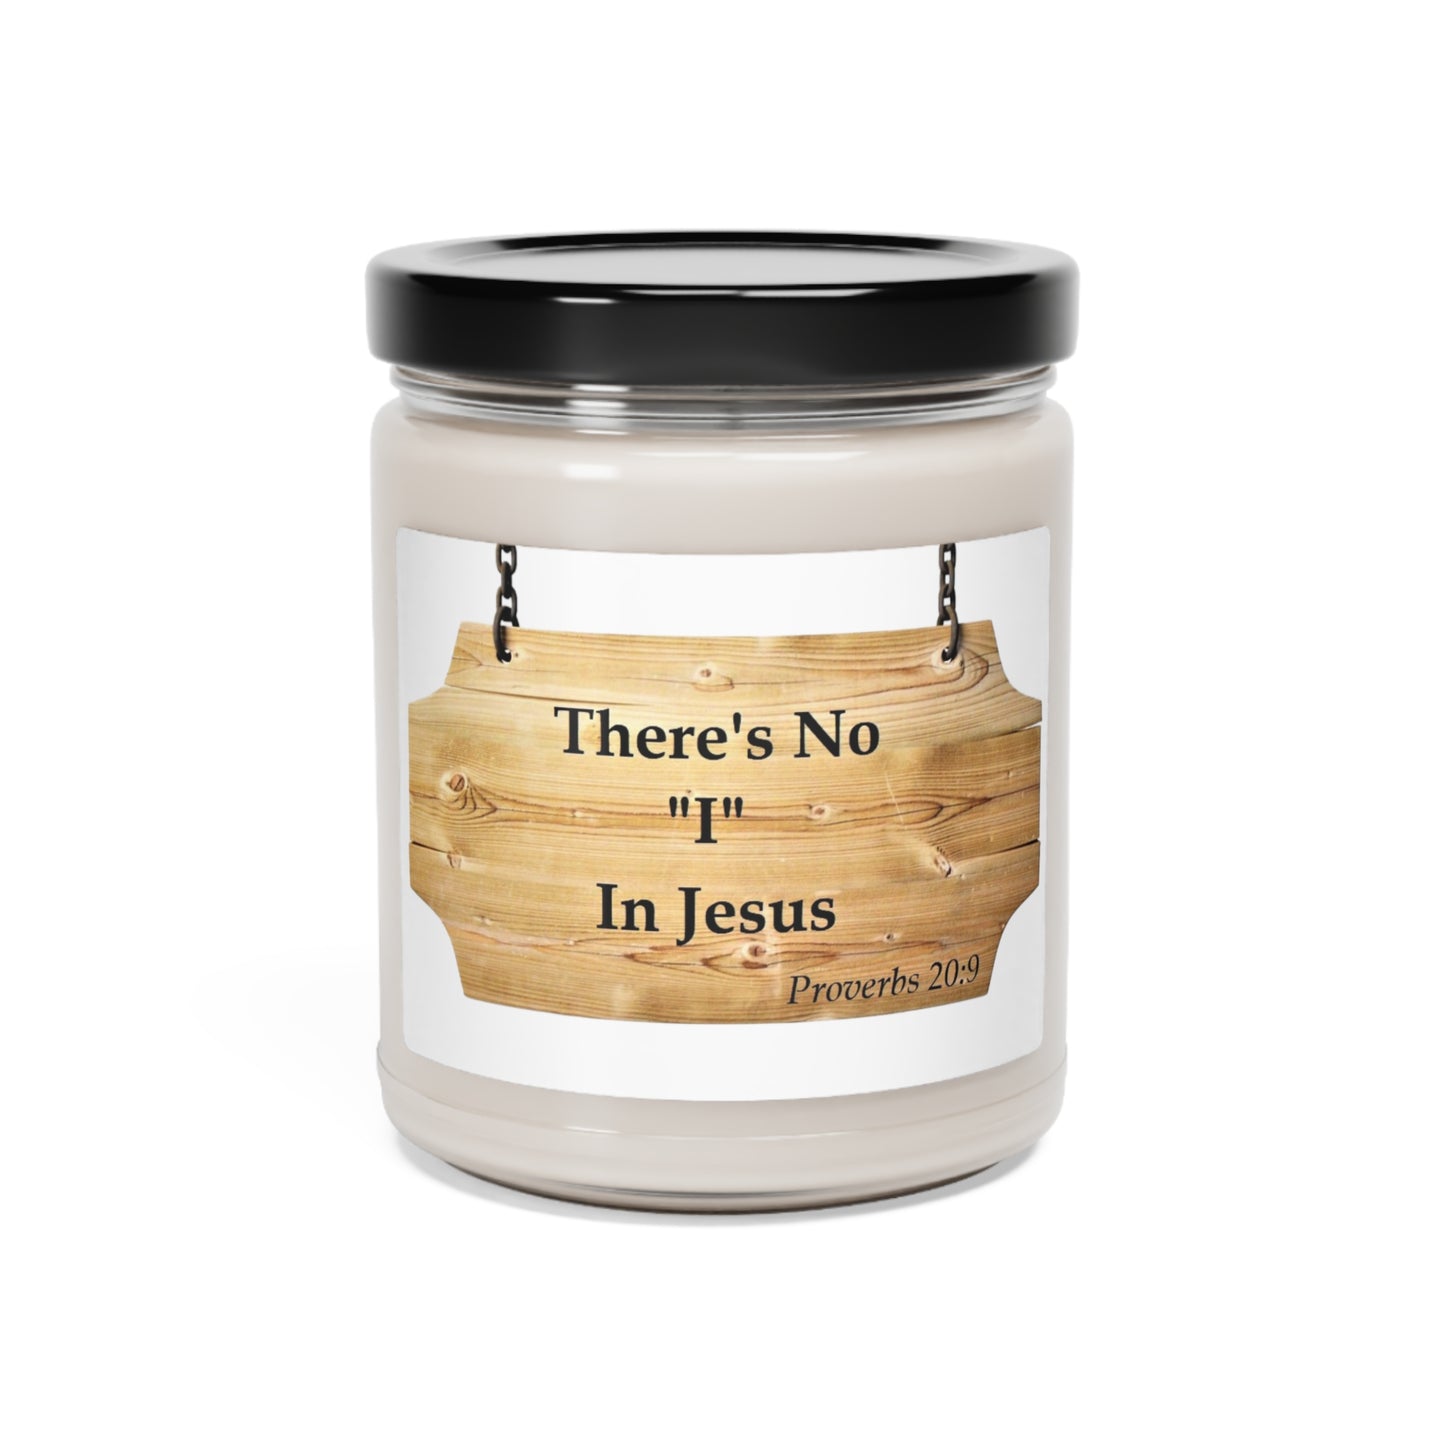 Bible Verse Candles - 100% Soy Wax Scented Candle with Inspirational Message | Assembled in the USA,Assembled in USA,Bio,Decor,Eco-friendly,Halloween,Holiday Picks,Home & Living,Home Decor,Made in the USA,Made in USA